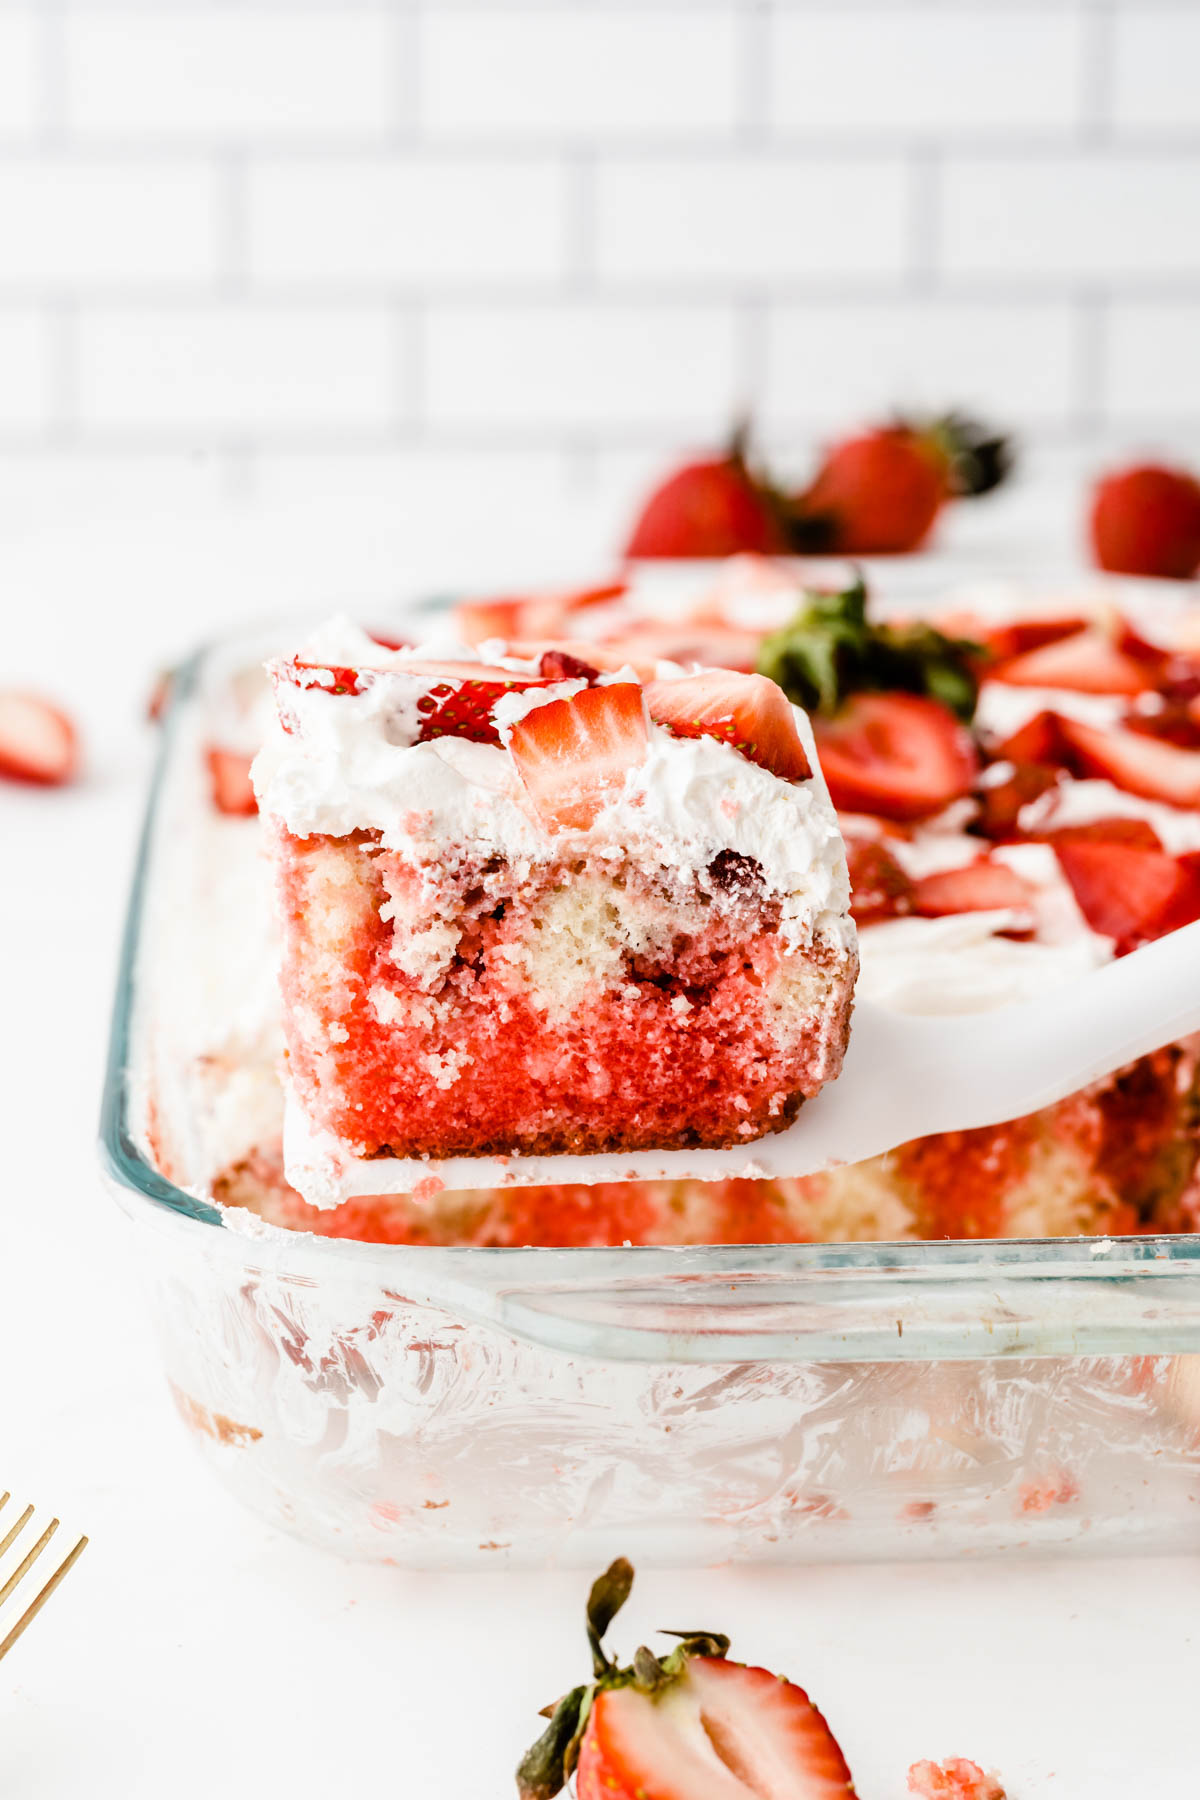 A strawberry poke cake with a slice being lifted, revealing its layers and fresh strawberry topping.